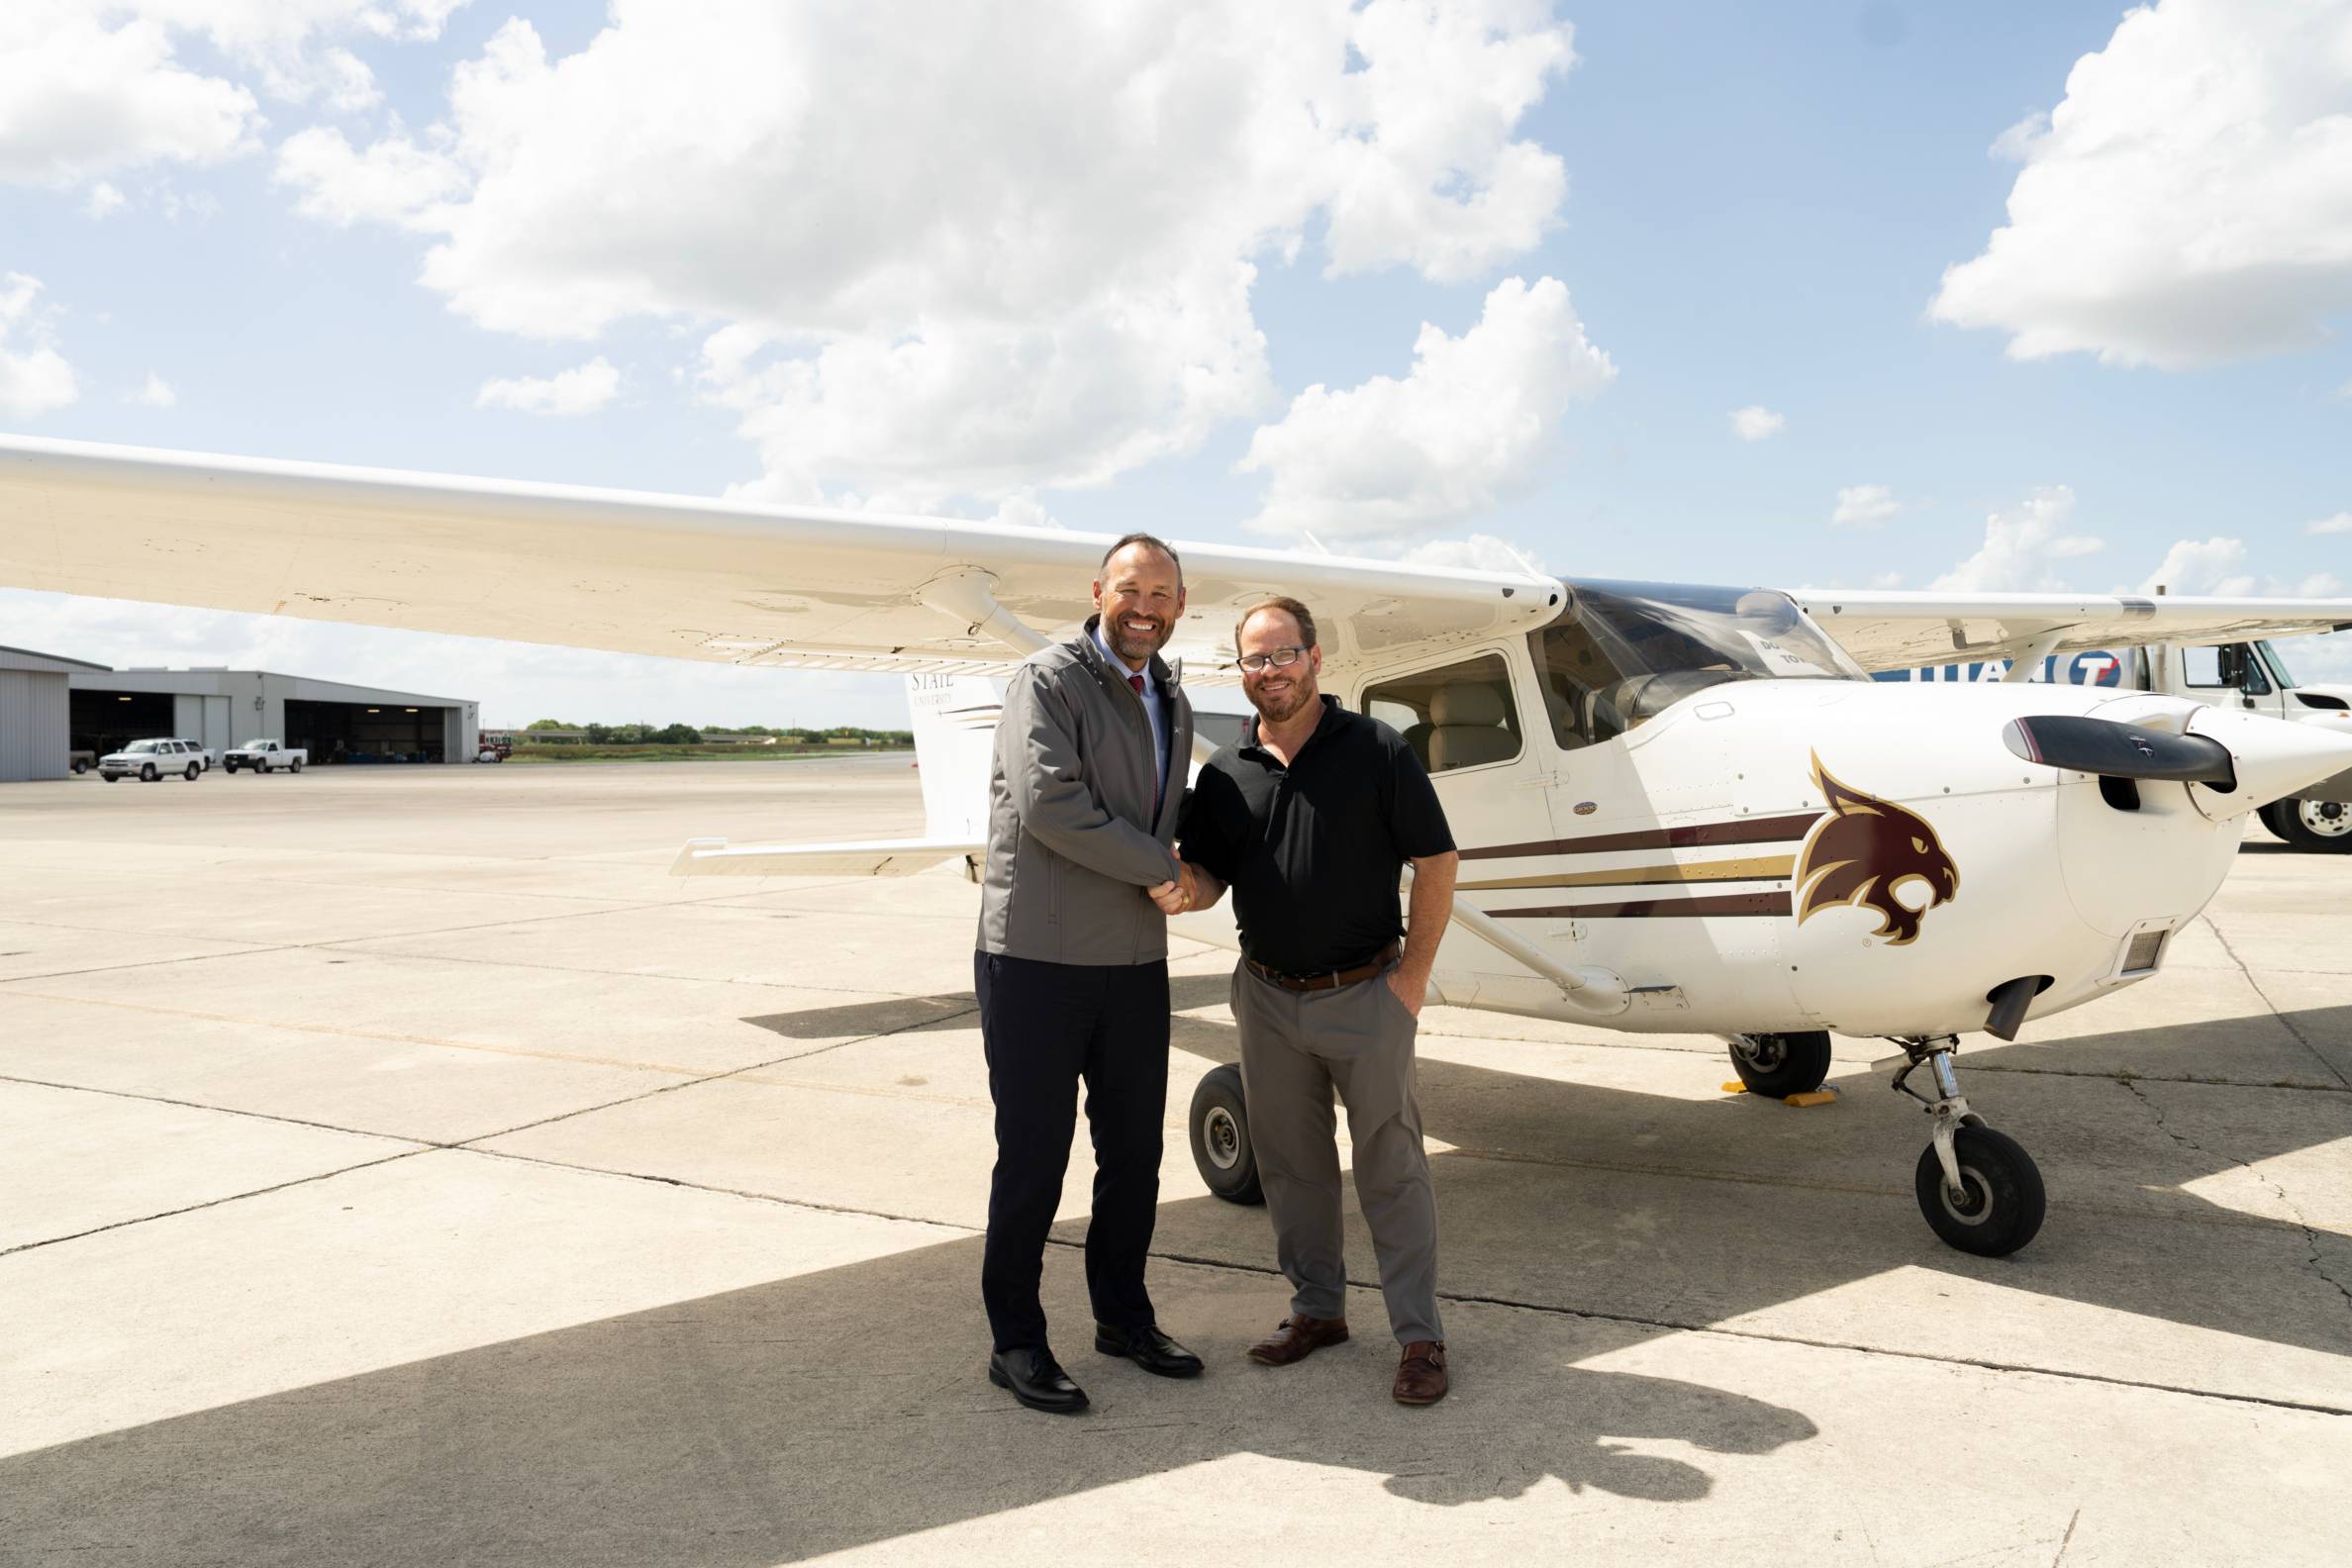 Texas State University partners with Coast Flight and TAP for new aviation science degree collaboration